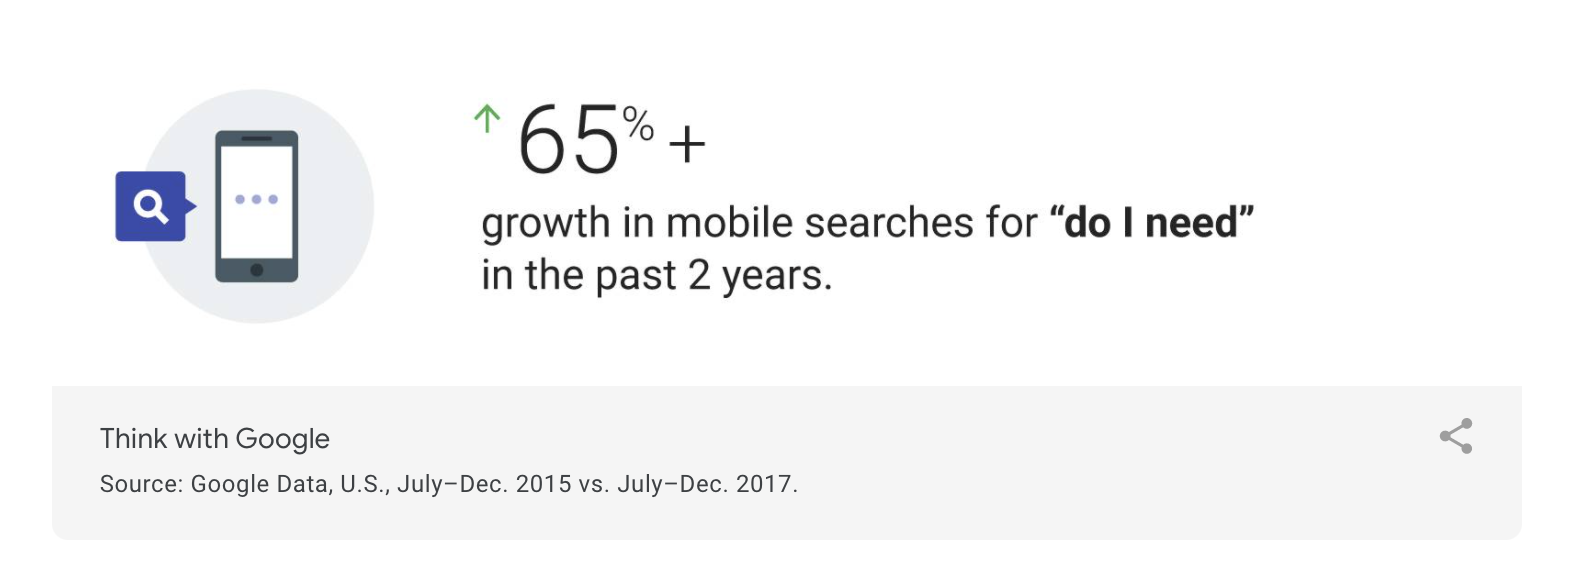 65% growth in mobile searches for "do I need" in the past 2 years.